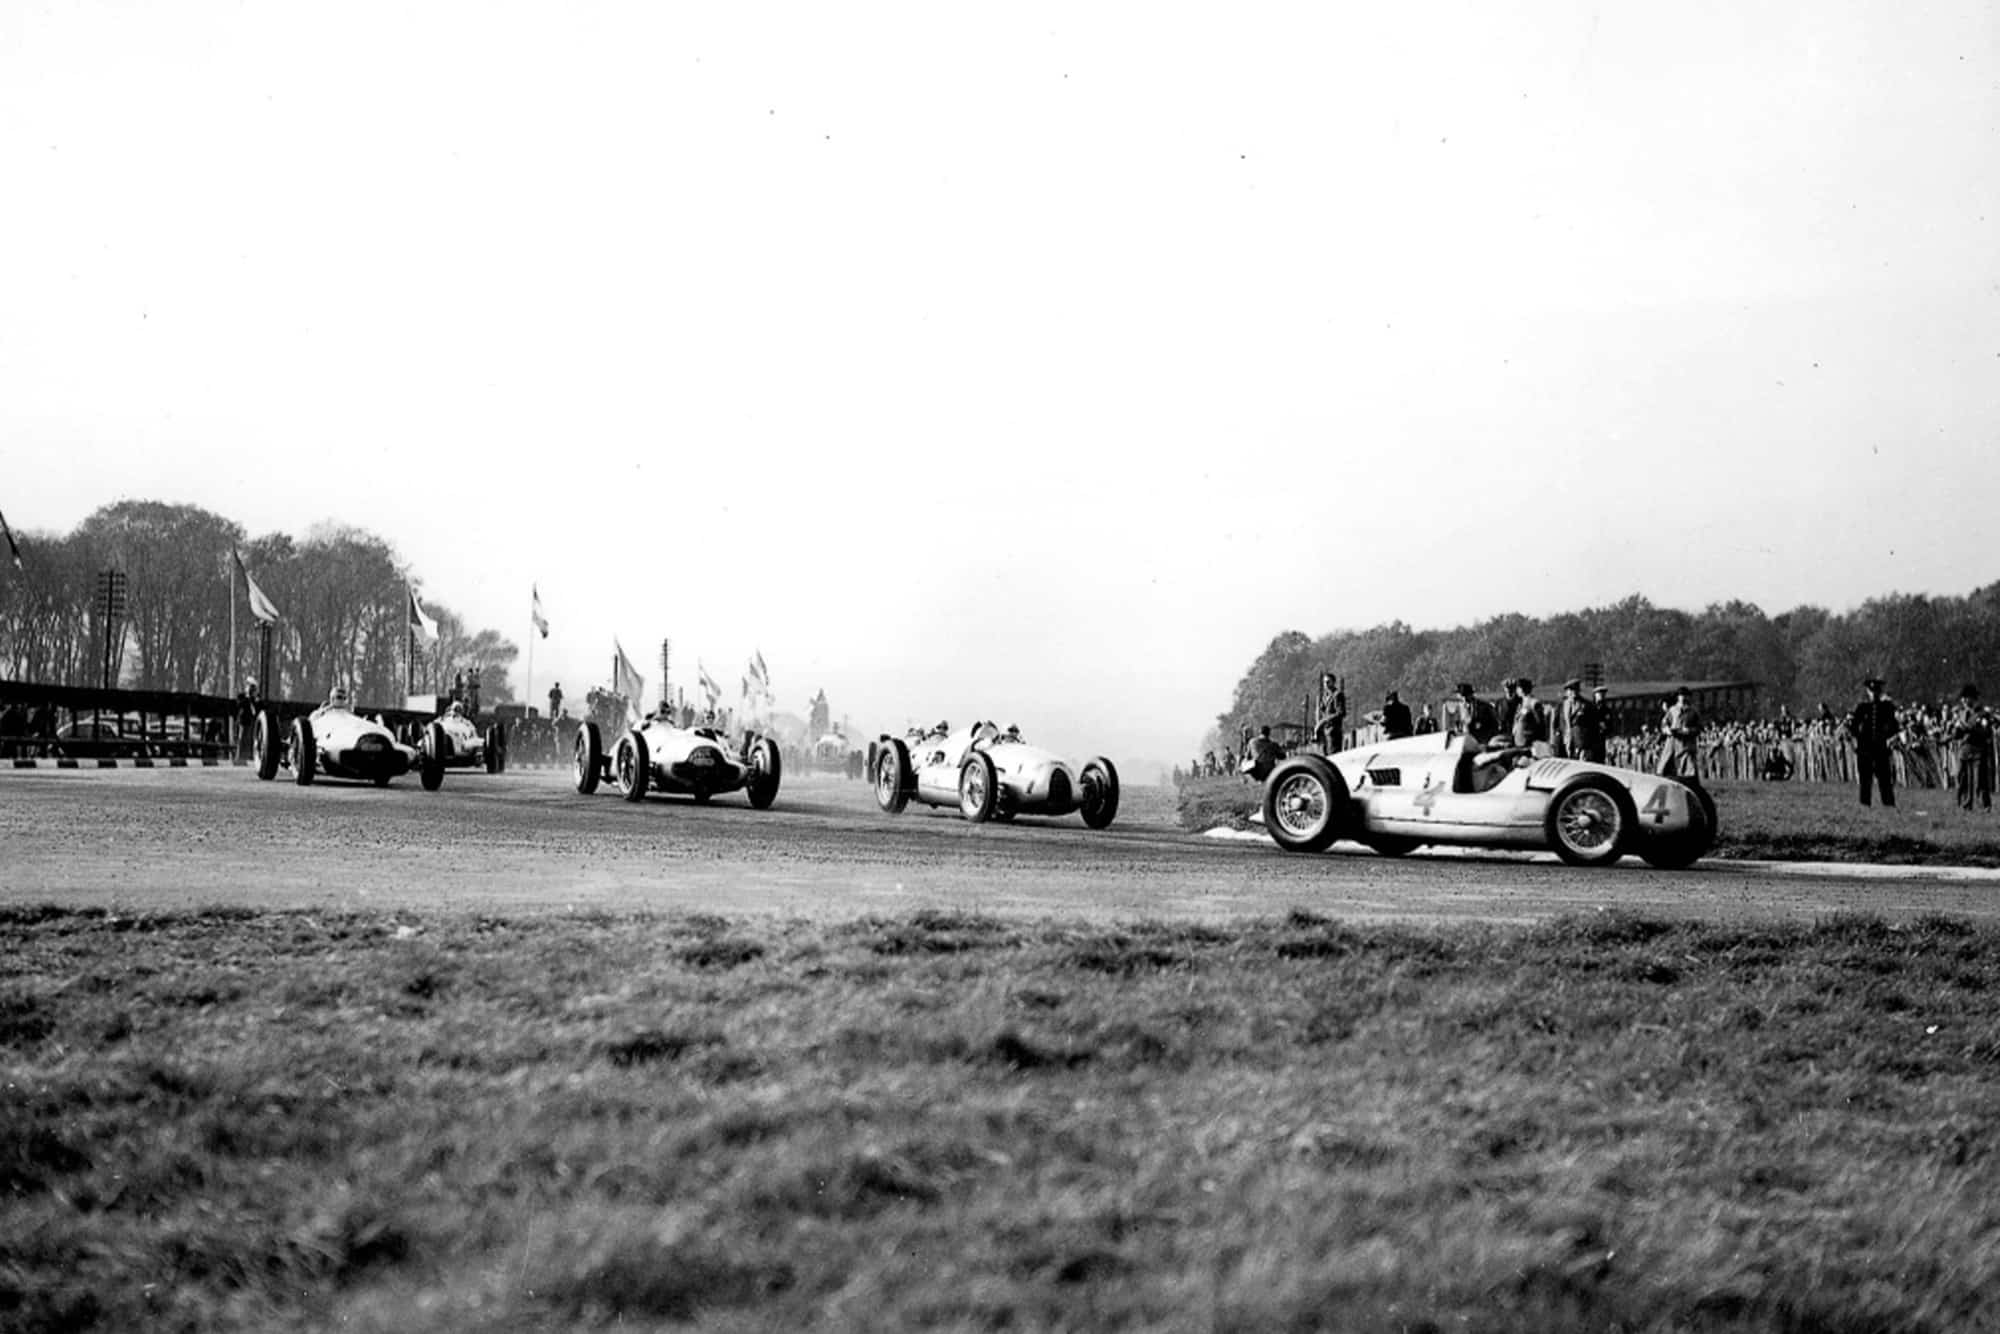 The Mercedes and Auto Unions during the 1938 British Grand Prix